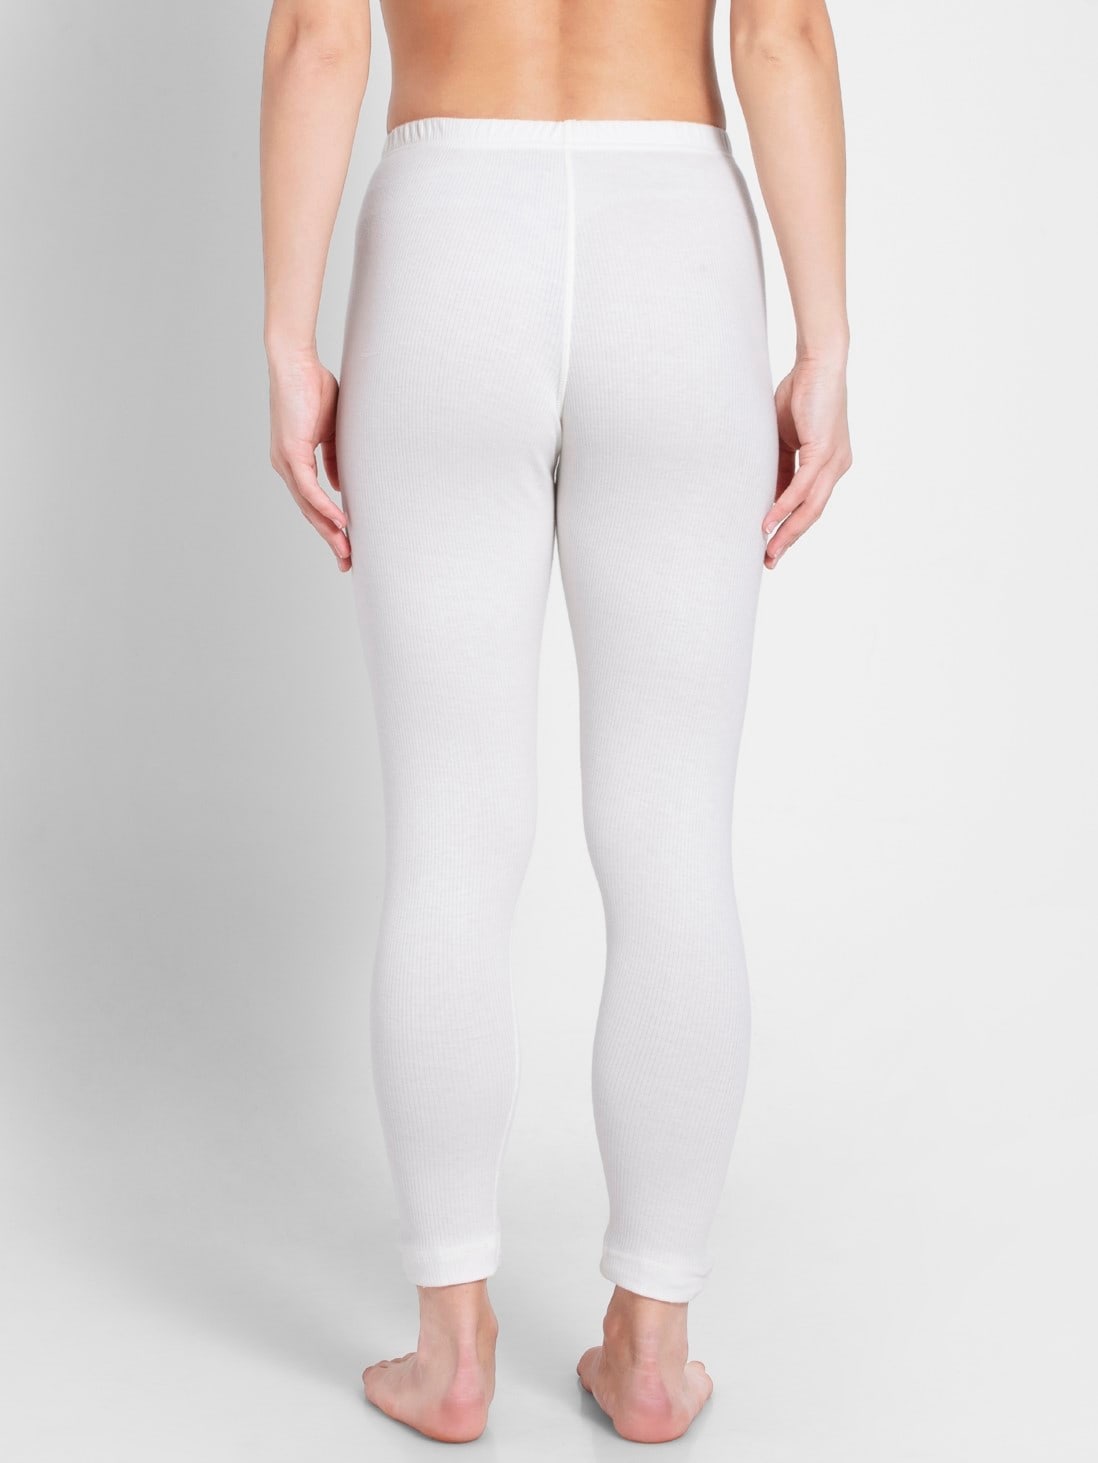 Buy Off White Thermal Leggings With Concealed Elastic Waistband For 